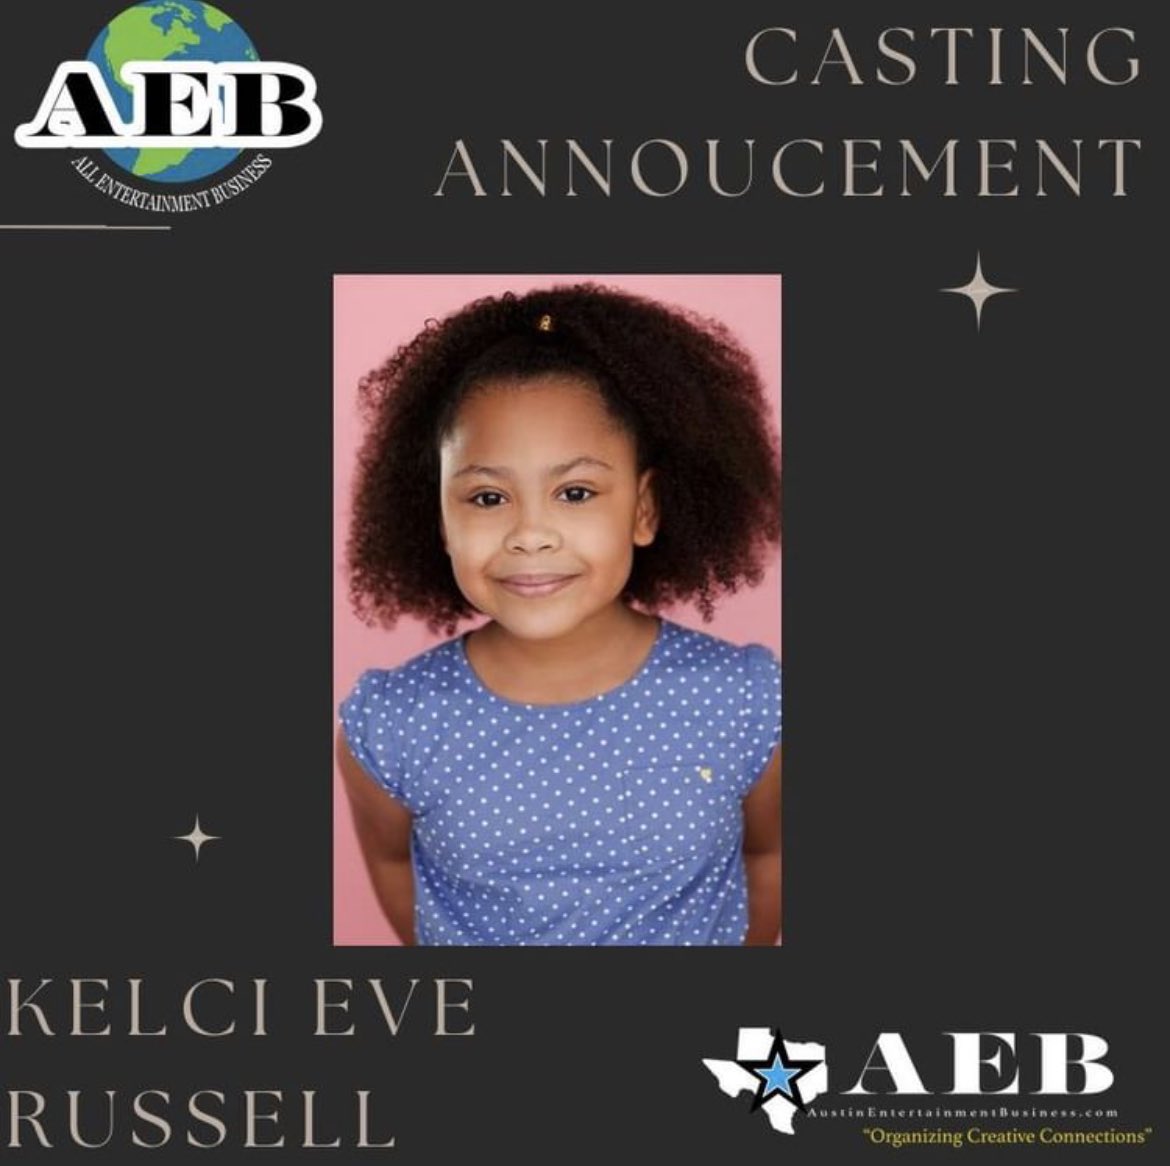 An AEB success story! AEB event attendee Director River Montgomery reached out to find an AEB attendee to cast for her upcoming movie. We are happy to announce 9-year-old Kelcie has been located and cast. 

#director #entertainmentbusiness #aeb